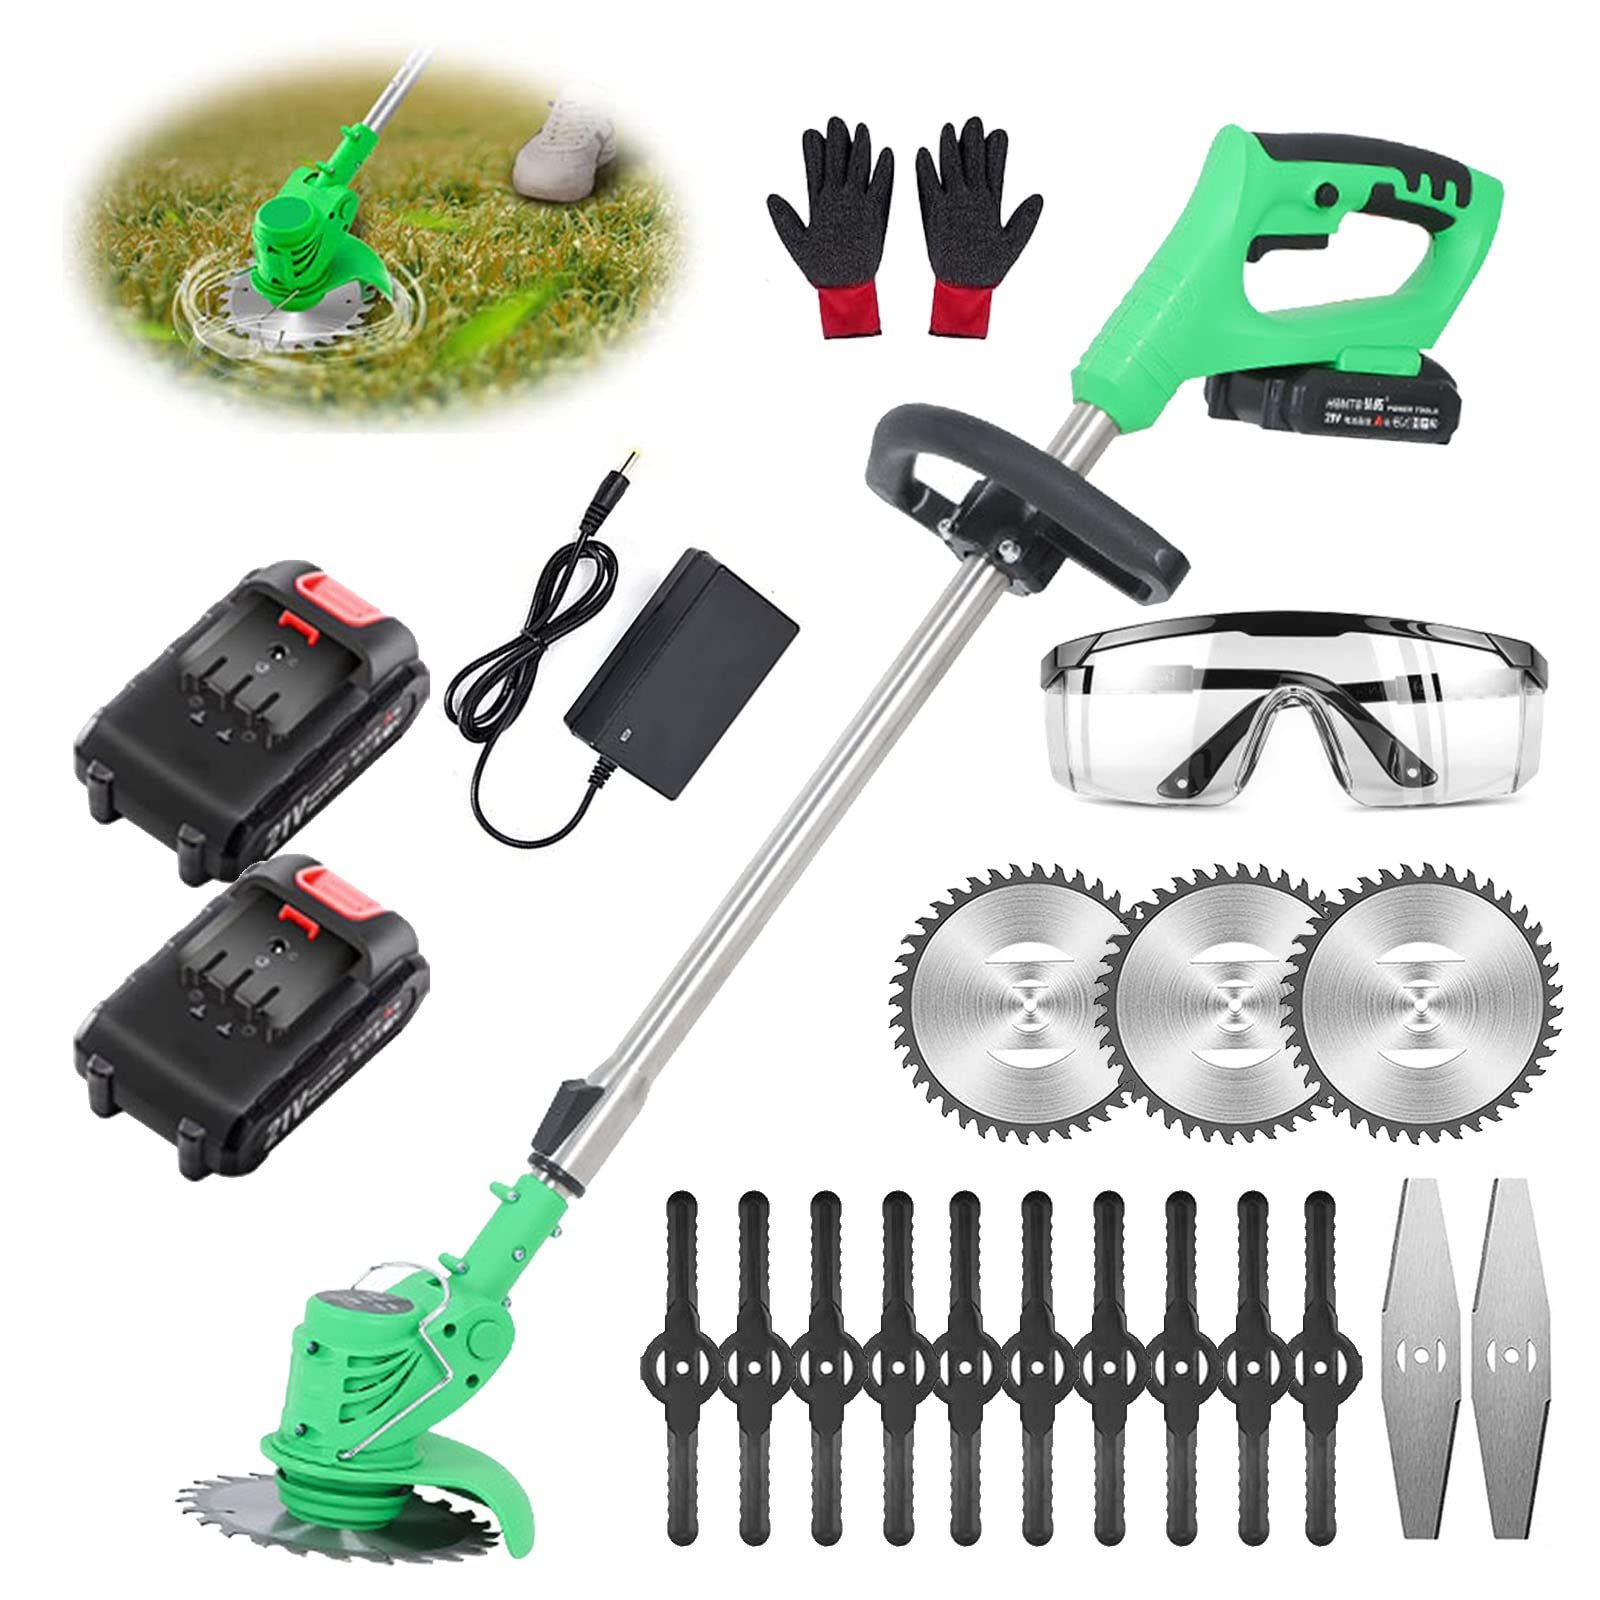 TRUNYAQI String Trimmer Cordless Grass Trimmer Electric Edger Battery Powered Lawn Mower Weed Brush Cutter Kit for Garden Review